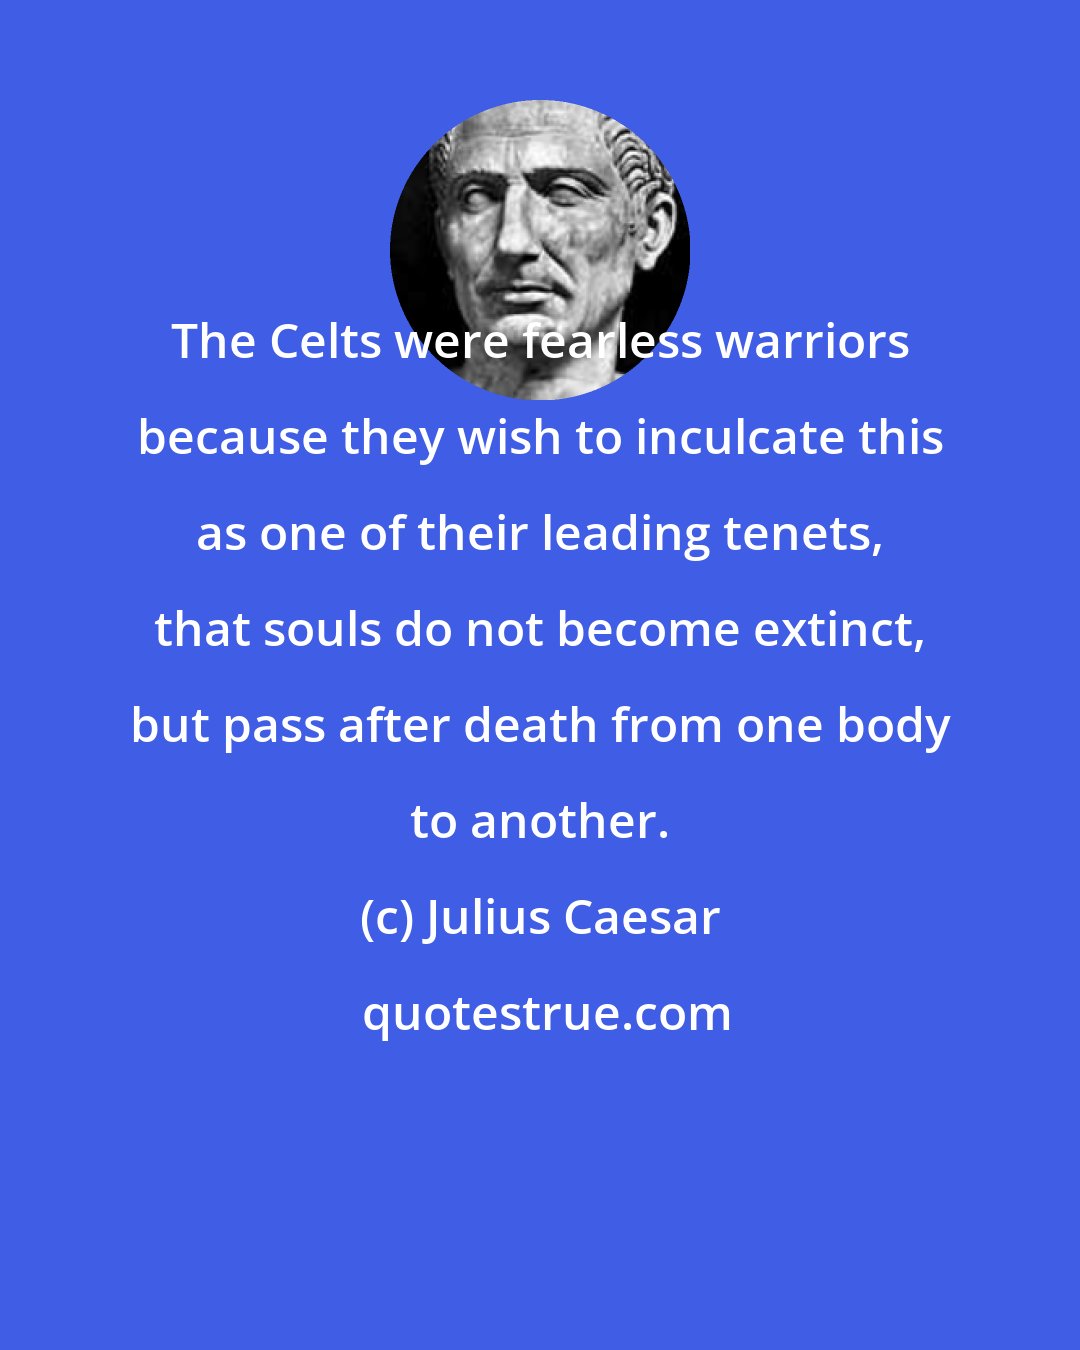 Julius Caesar: The Celts were fearless warriors because they wish to inculcate this as one of their leading tenets, that souls do not become extinct, but pass after death from one body to another.